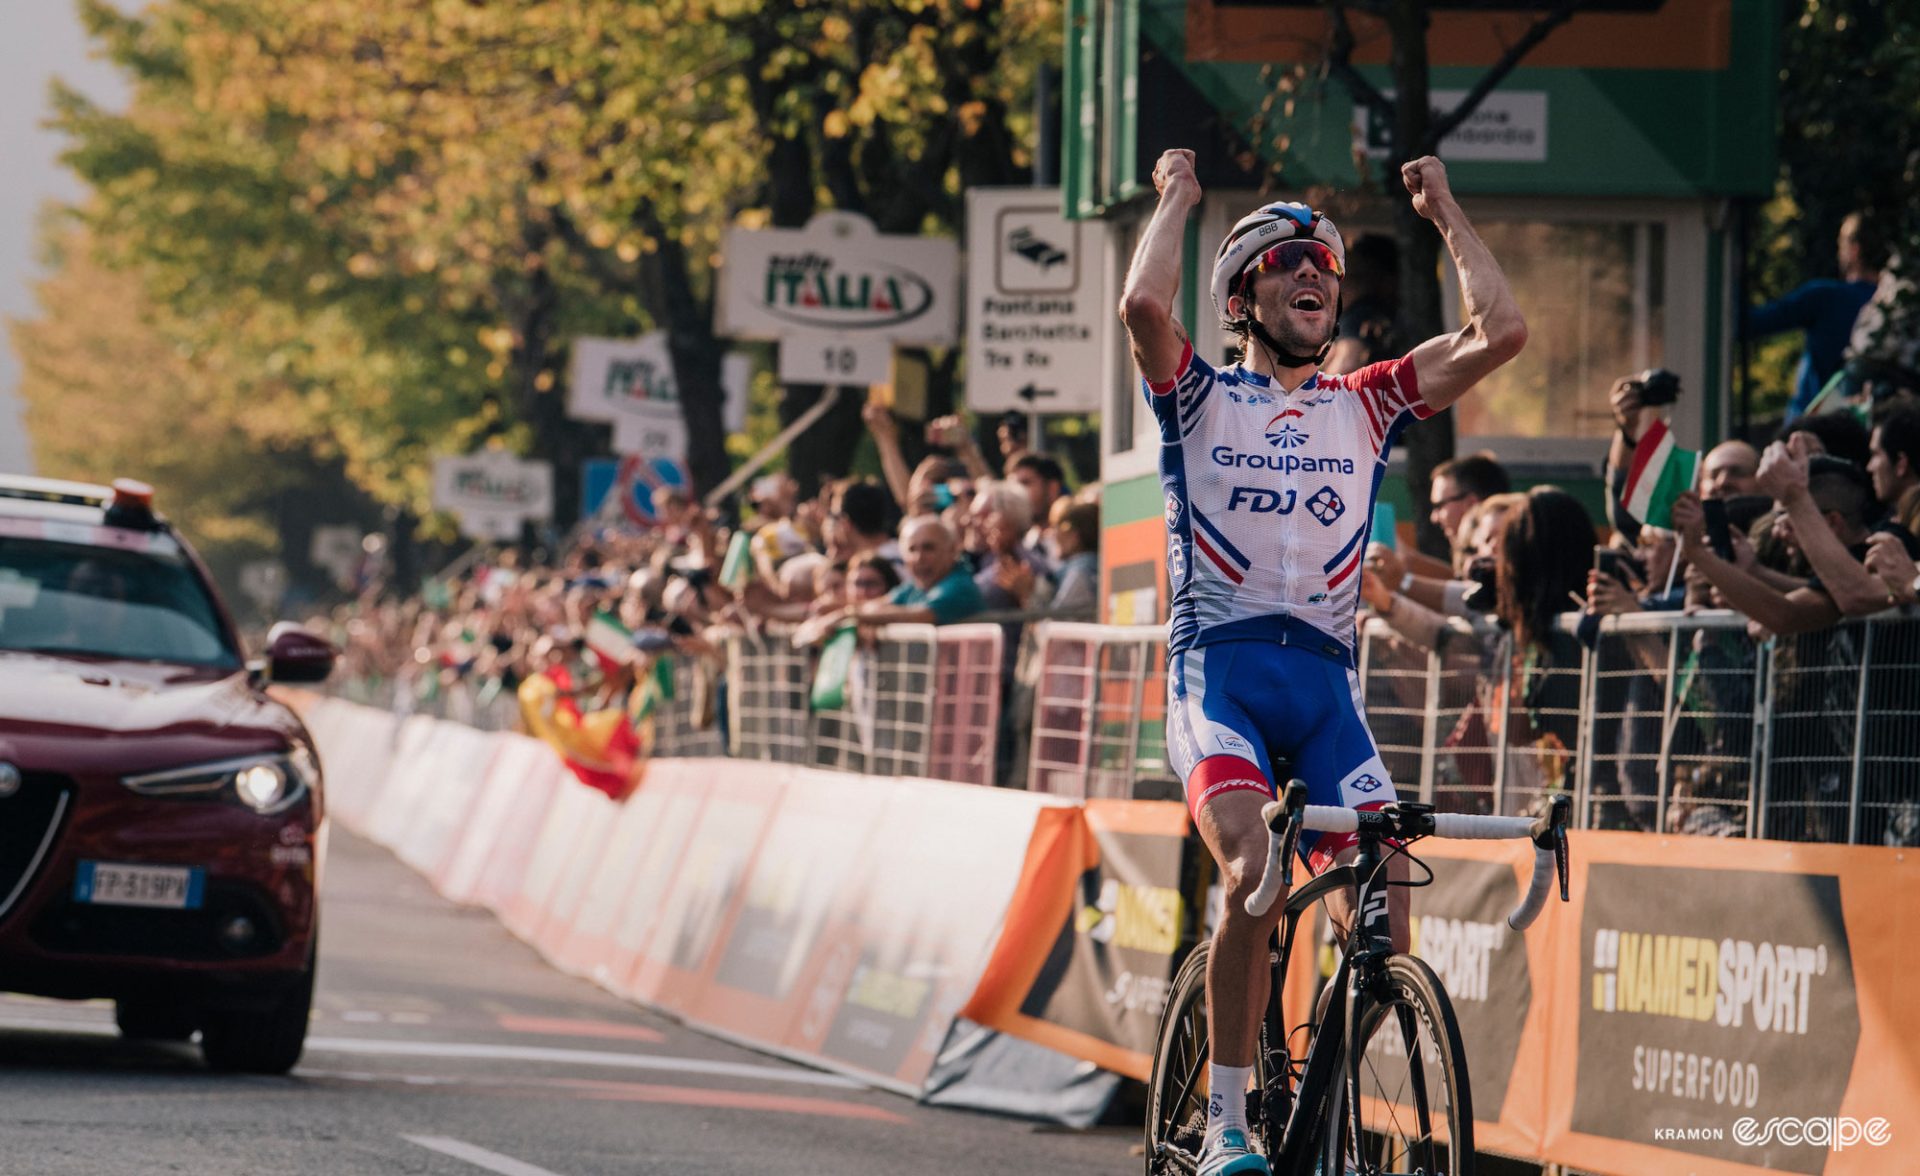 Pinot crosses the finish line, both hands raised in celebration.